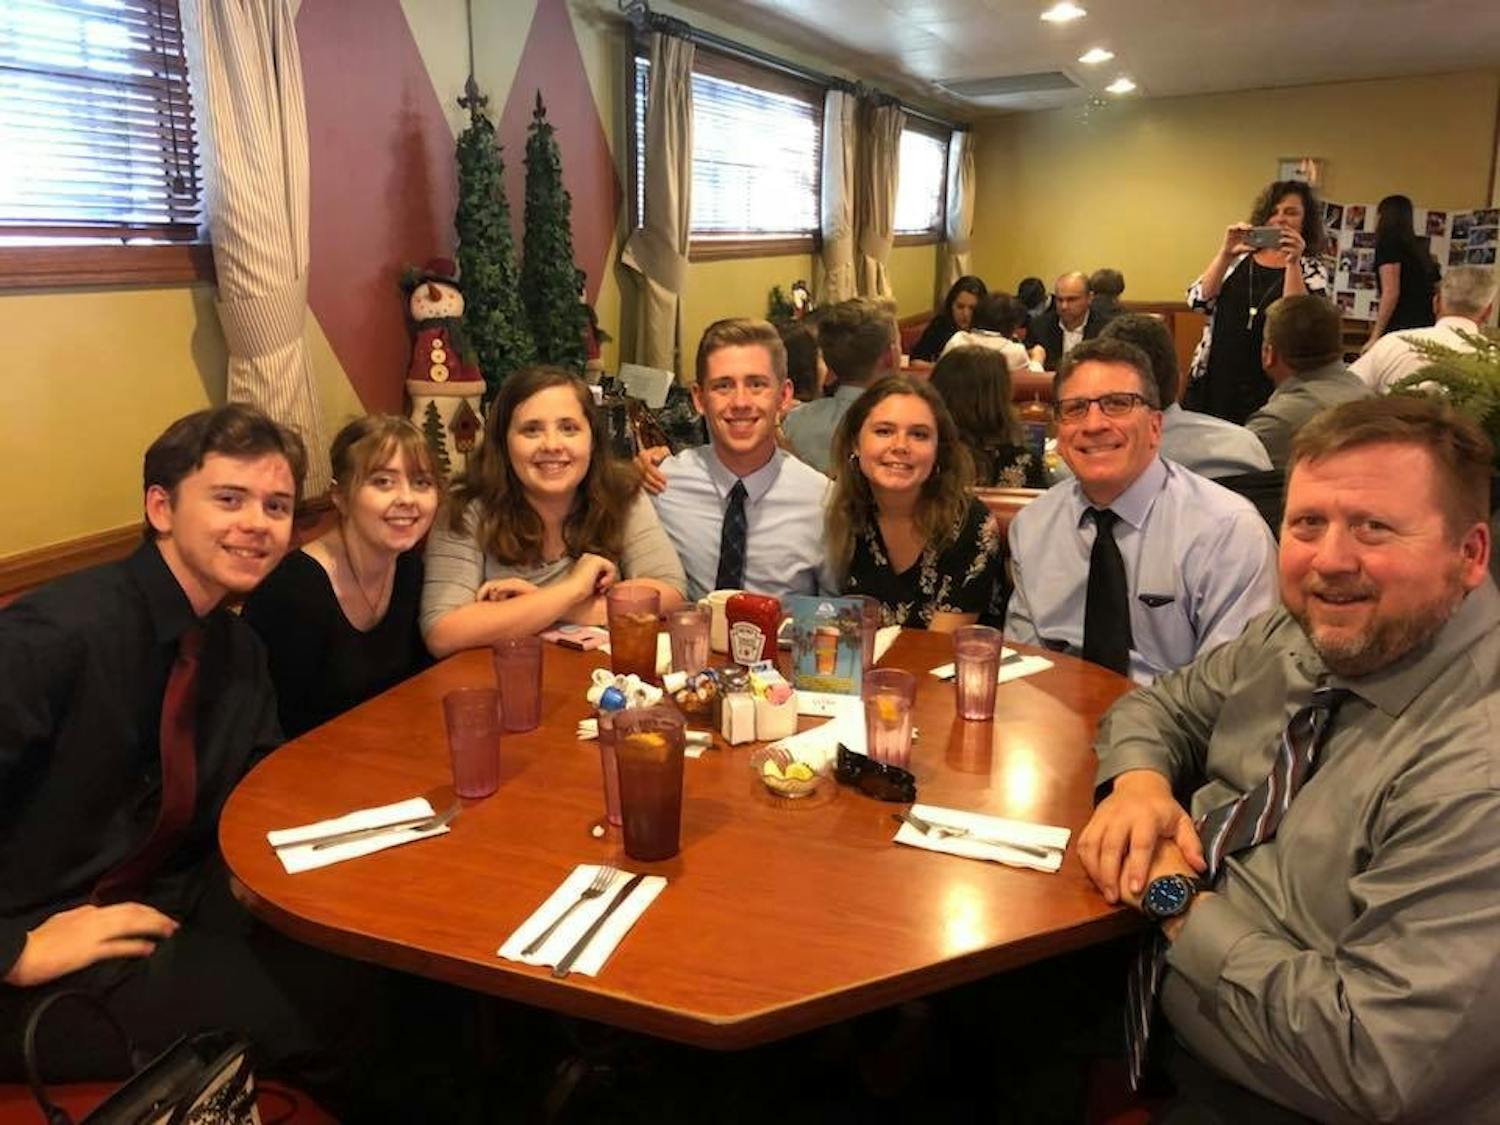 Kyle Land (center) and his family at The Talleyrand Restaurant in Burbank, C.A. after his grandfather's funeral. Courtesy of the Land family.